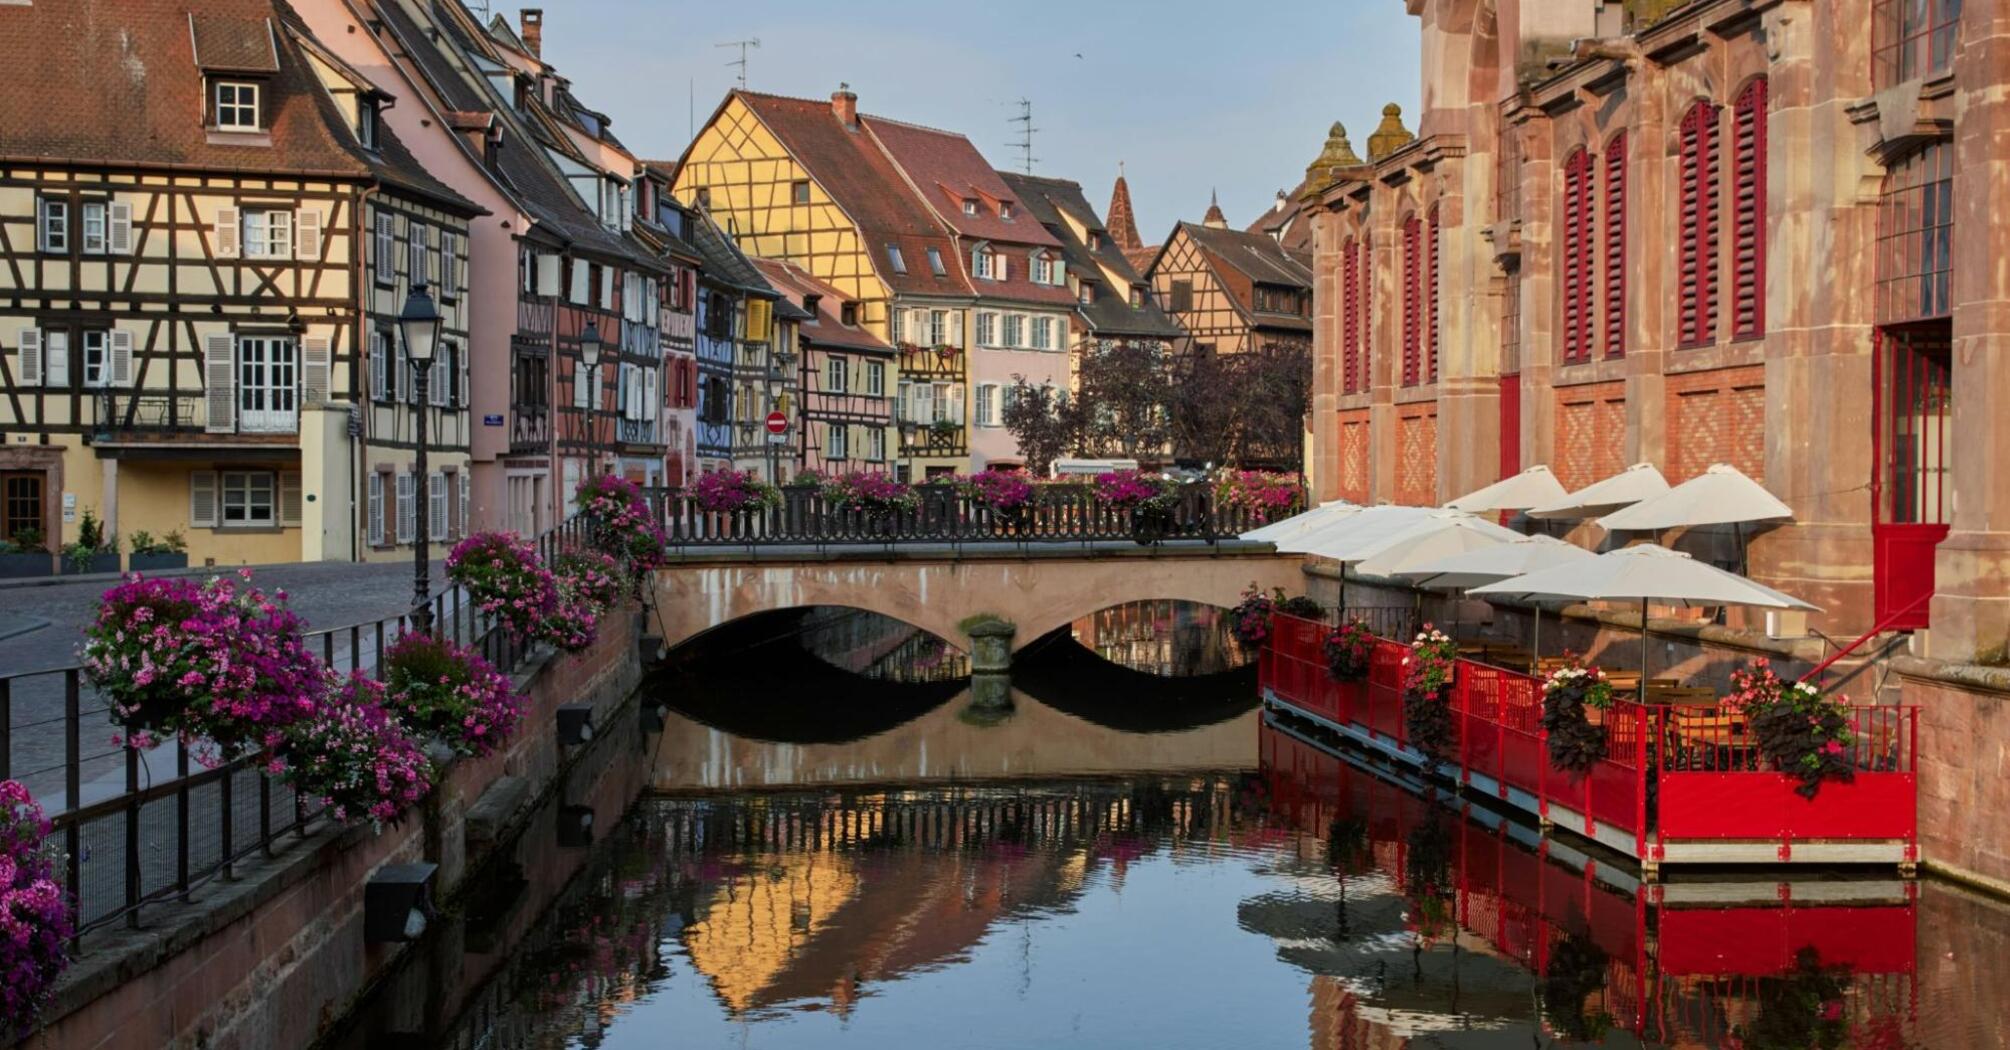 A beautiful bridge and picturesque houses in Colmar, Alsace